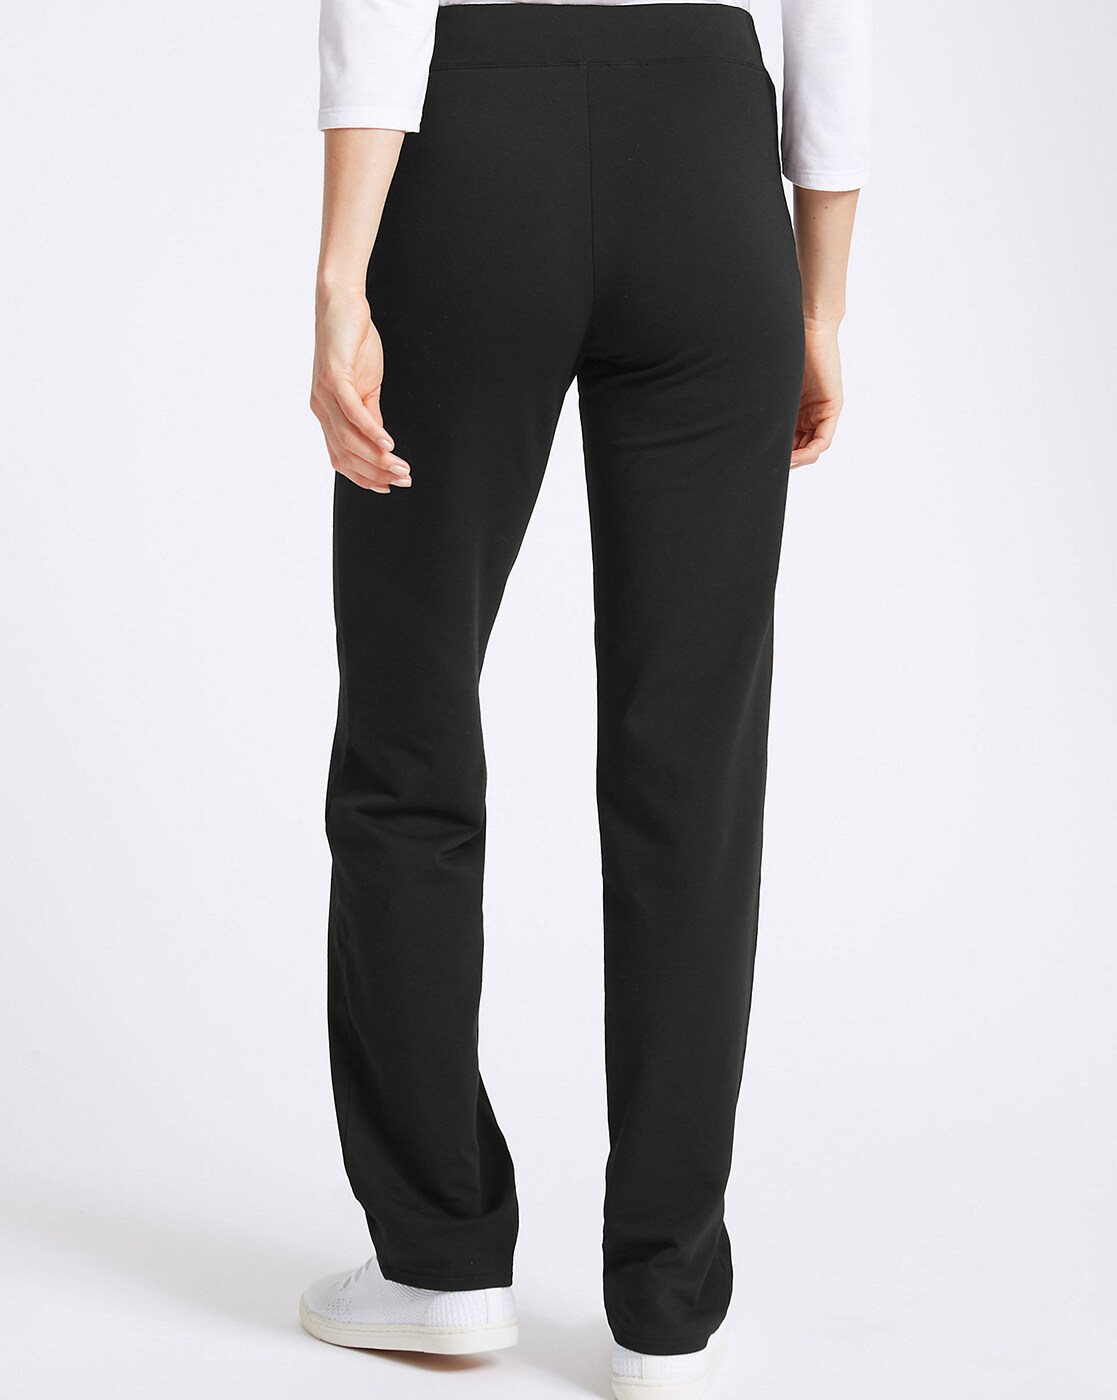 Buy Chocolate Track Pants for Women by Marks & Spencer Online